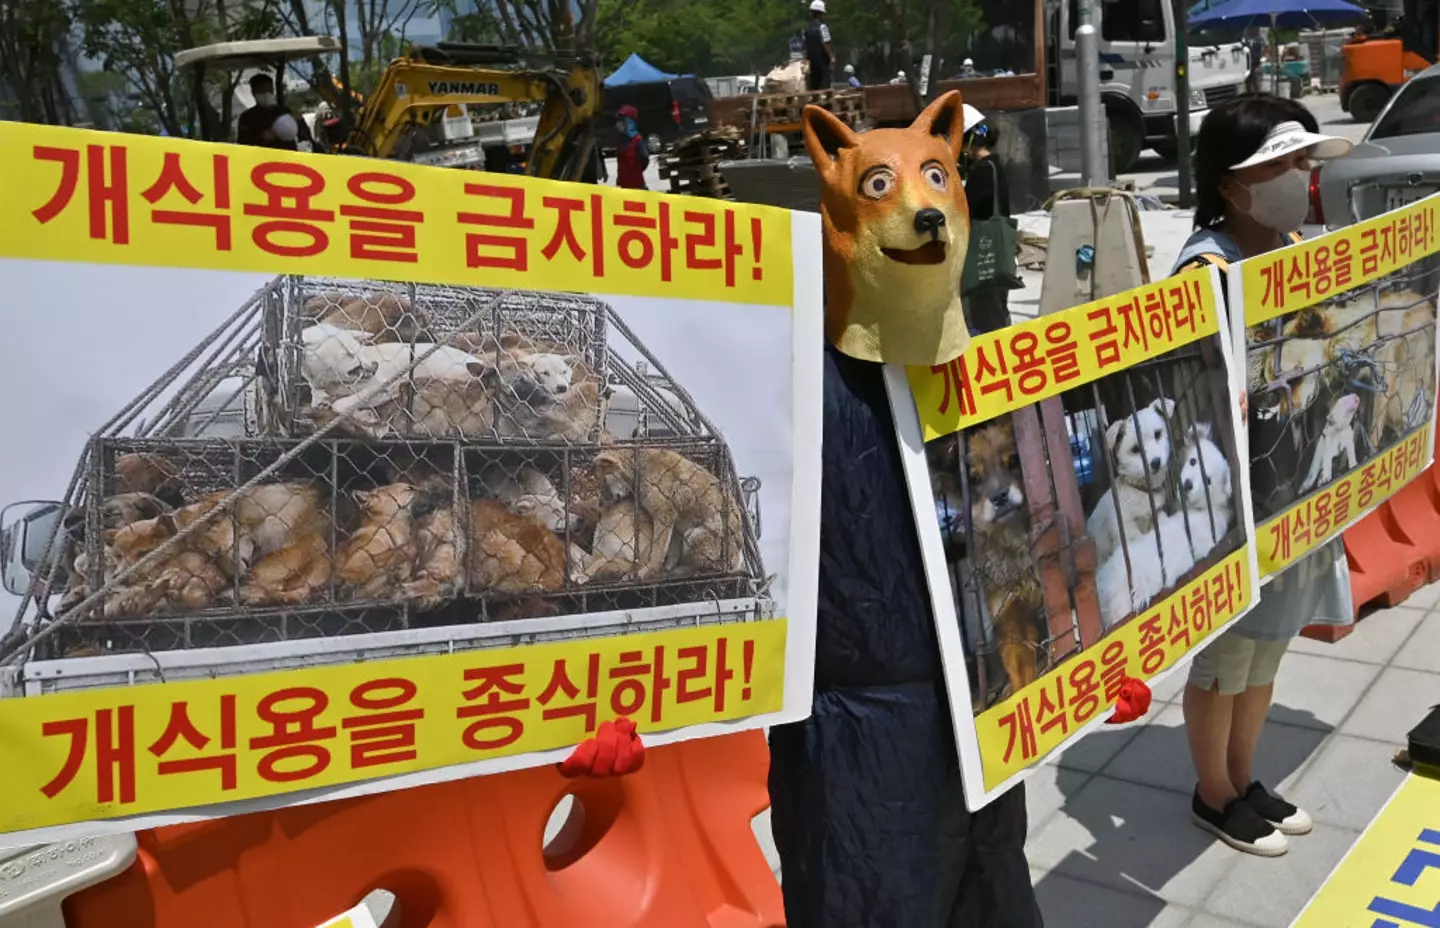 There has been growing opposition to eating dog meat in South Korea.